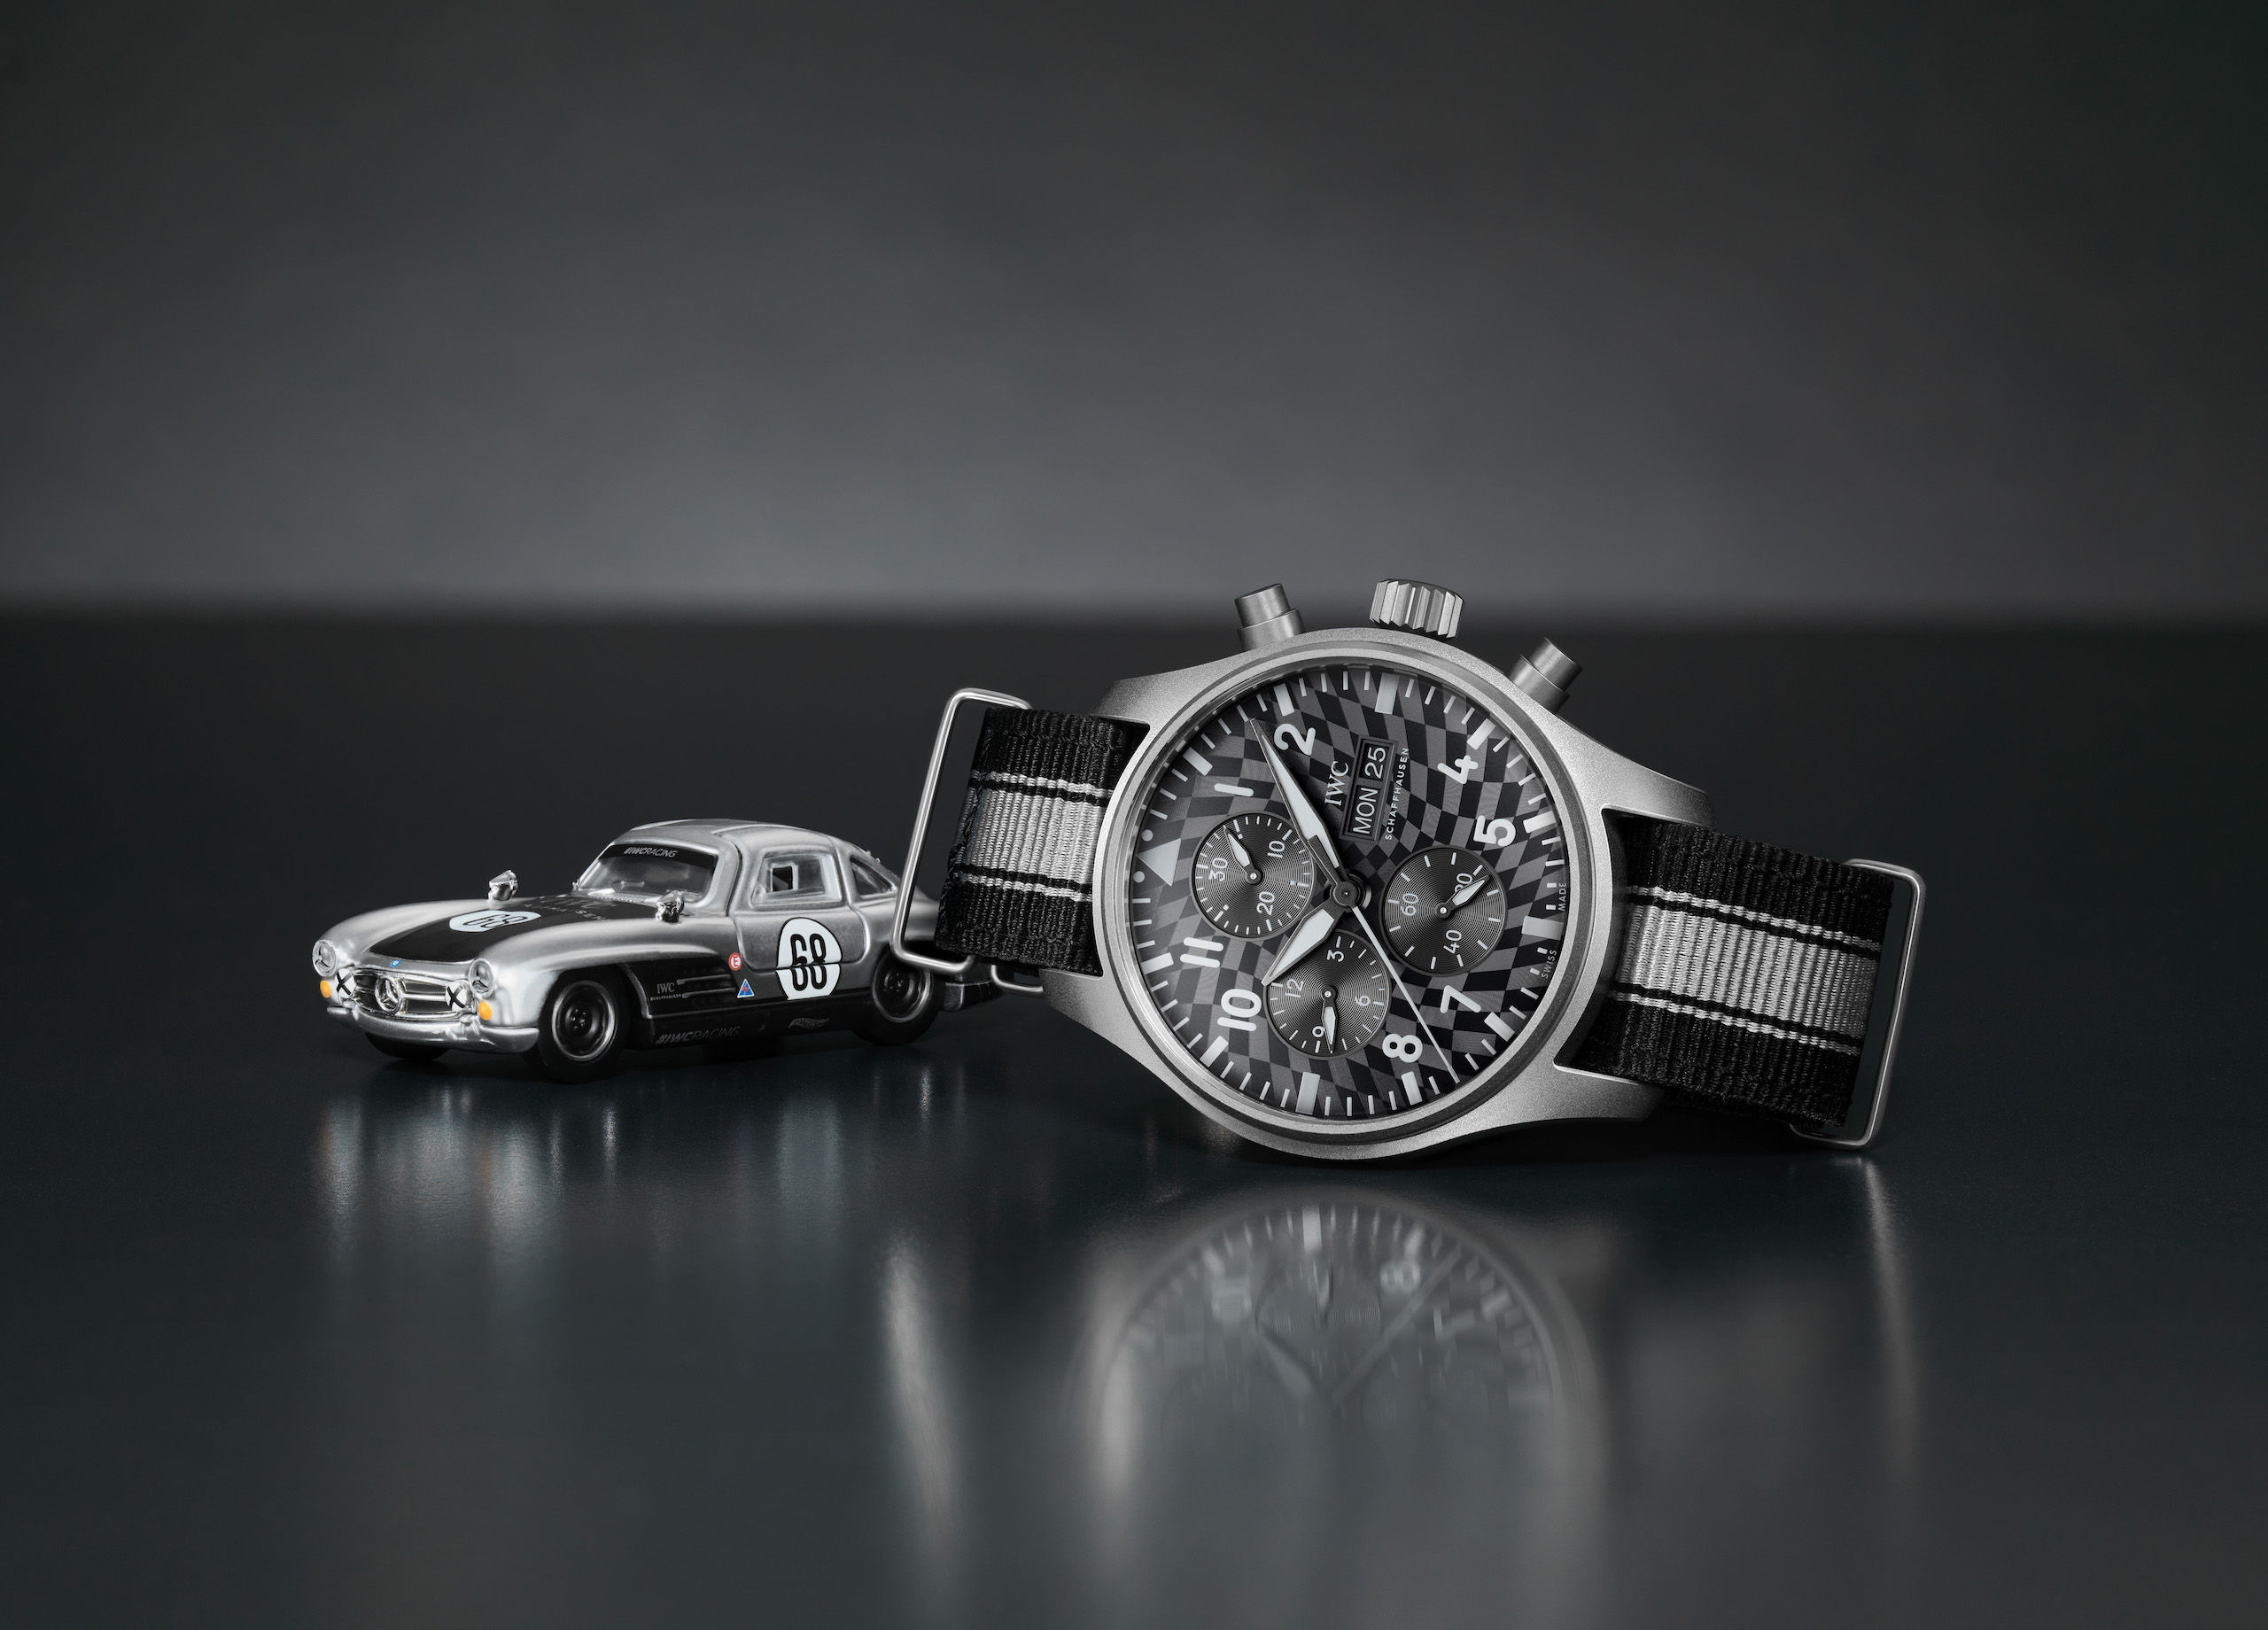 the IWC x Hot Wheels™ “Racing Works” collector's set